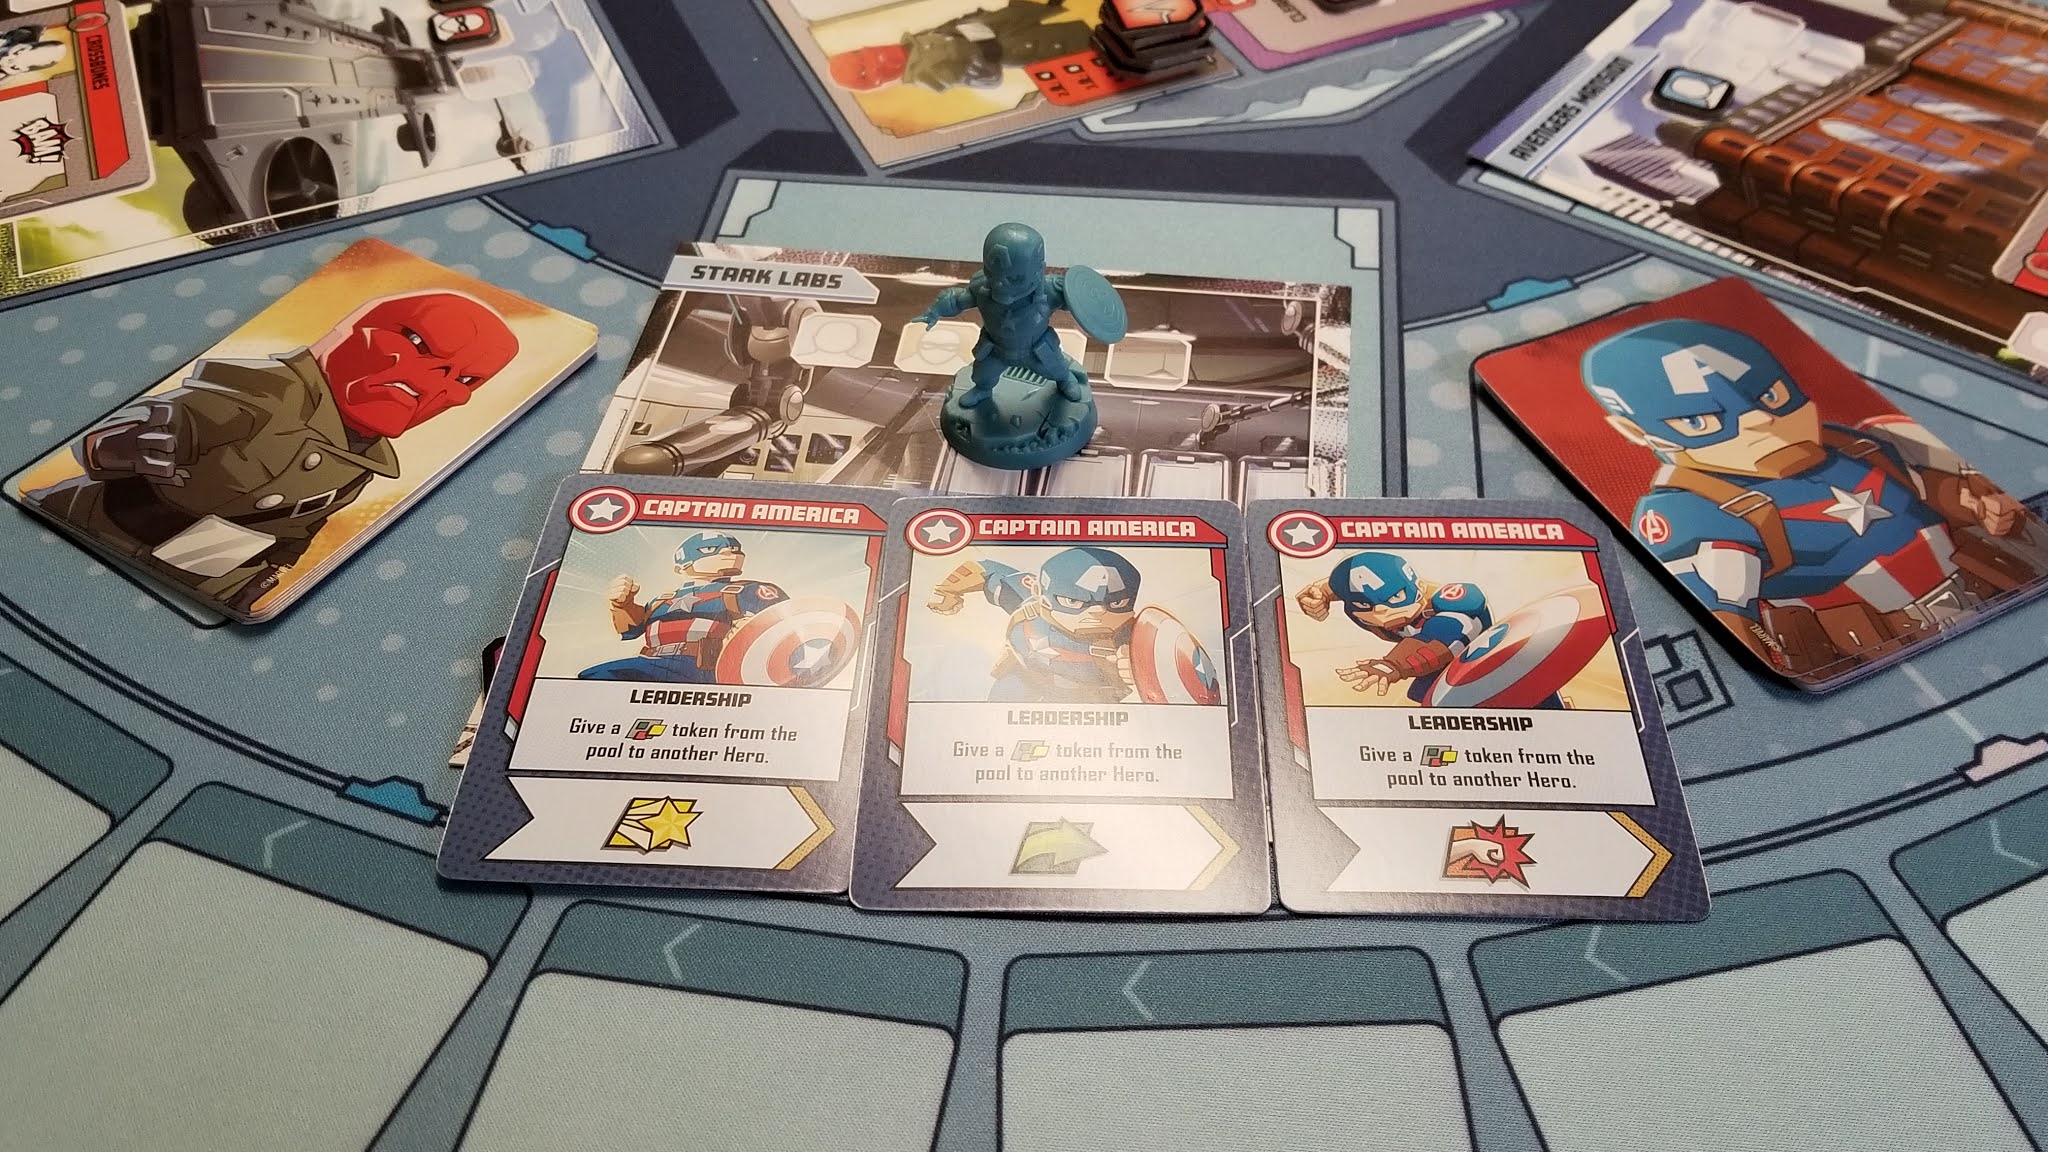 Marvel United, the new comic-book co-op board game from the